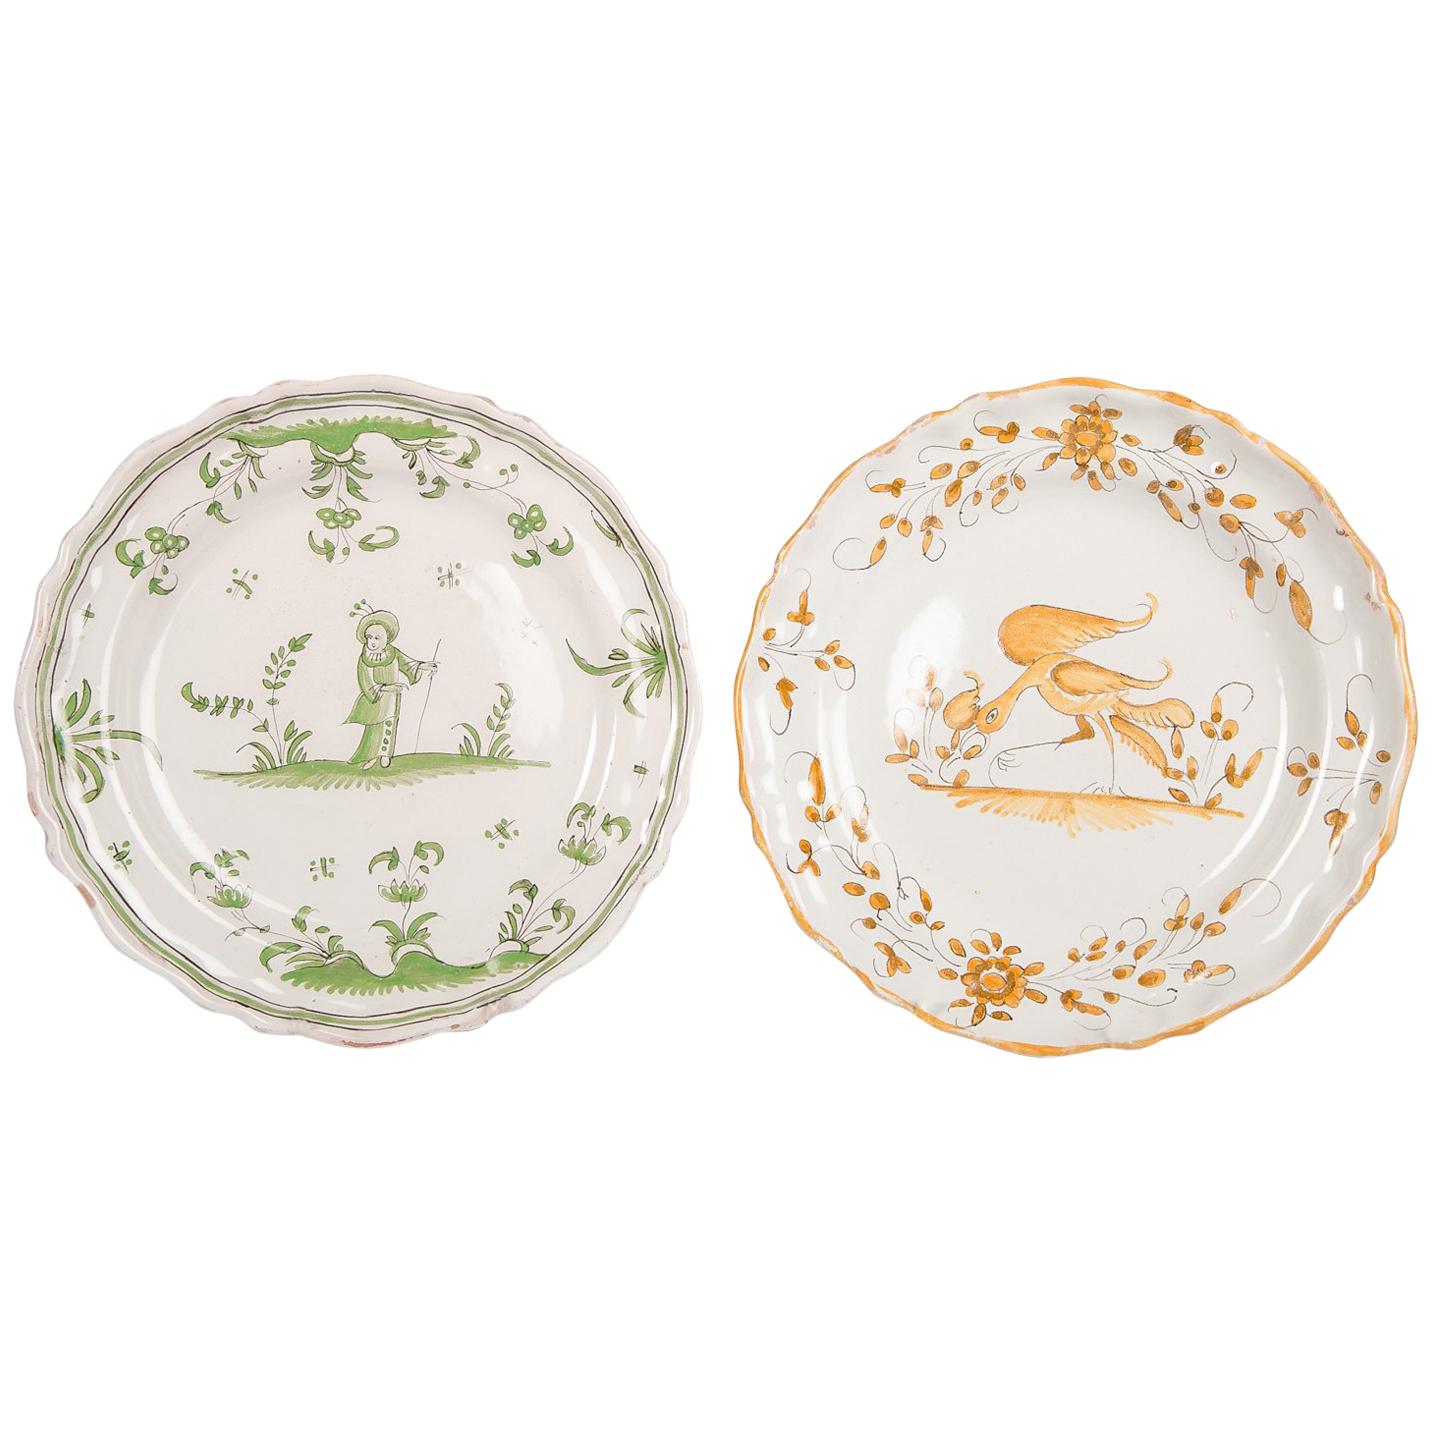 French Faience Dishes or Plates Made circa 1780